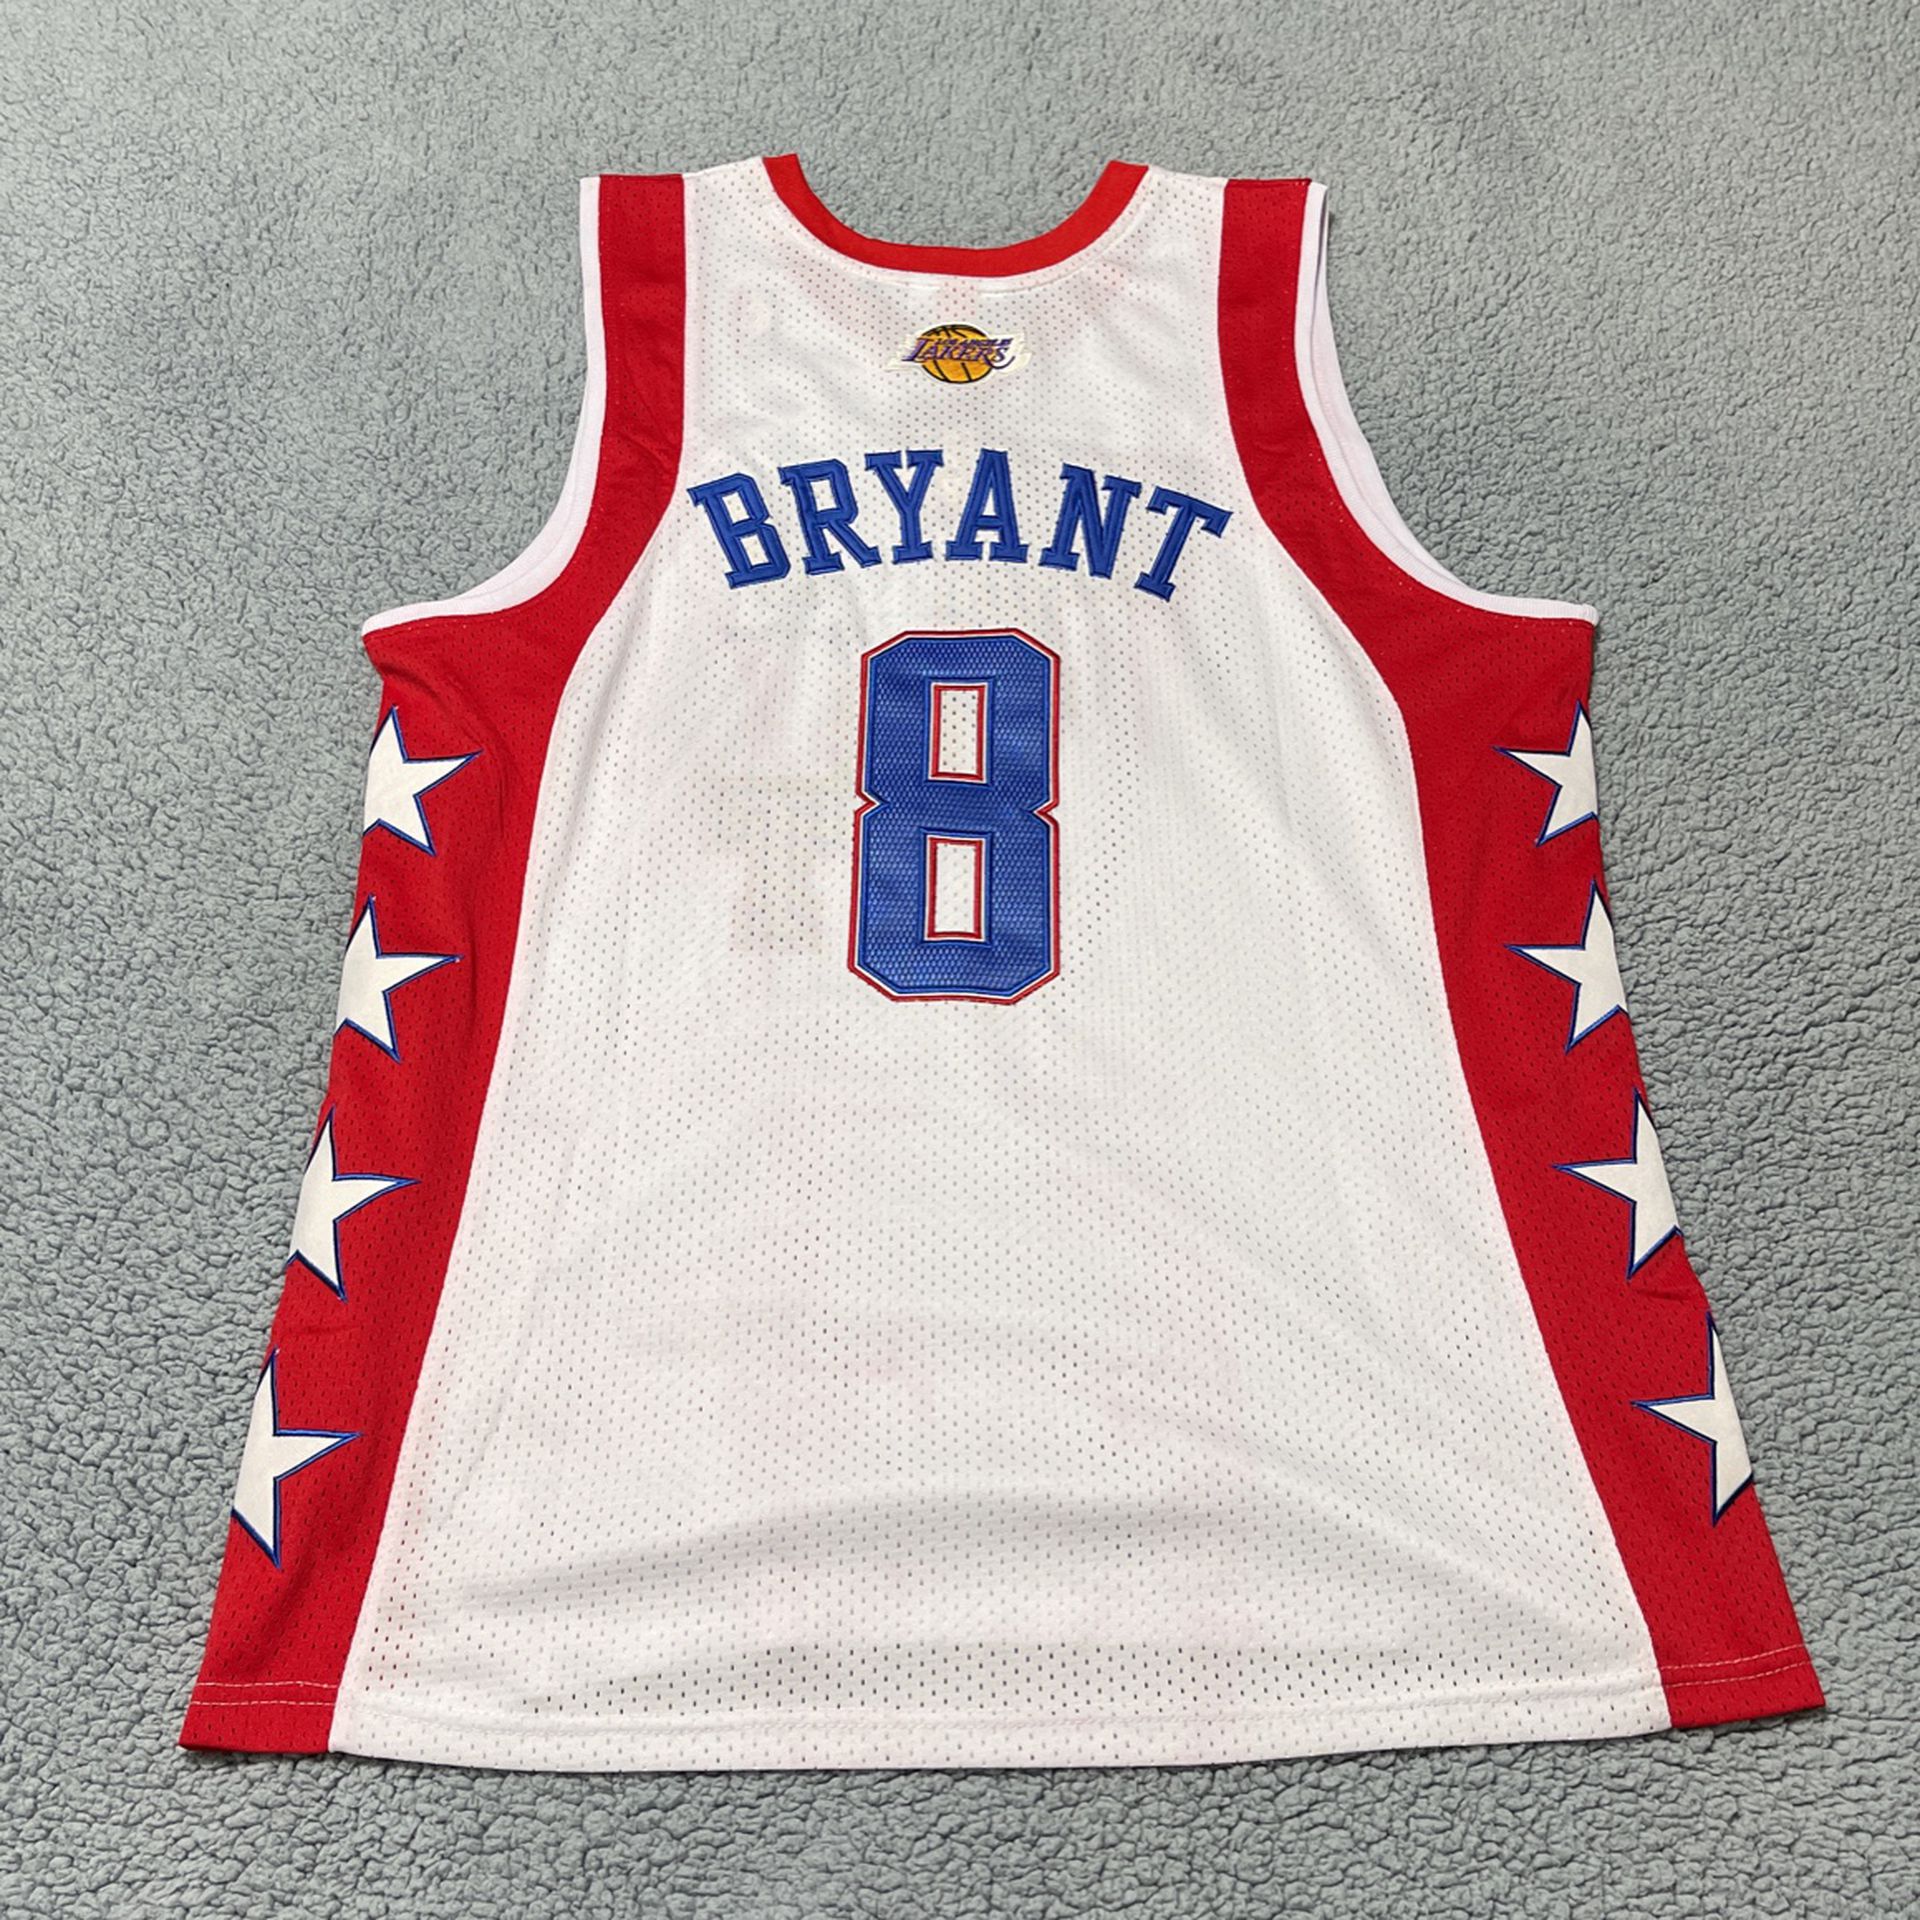 Kobe Bryant All Star Jersey XL 2004 Mitchell Ness Lakers Throwback NEW with Tags 